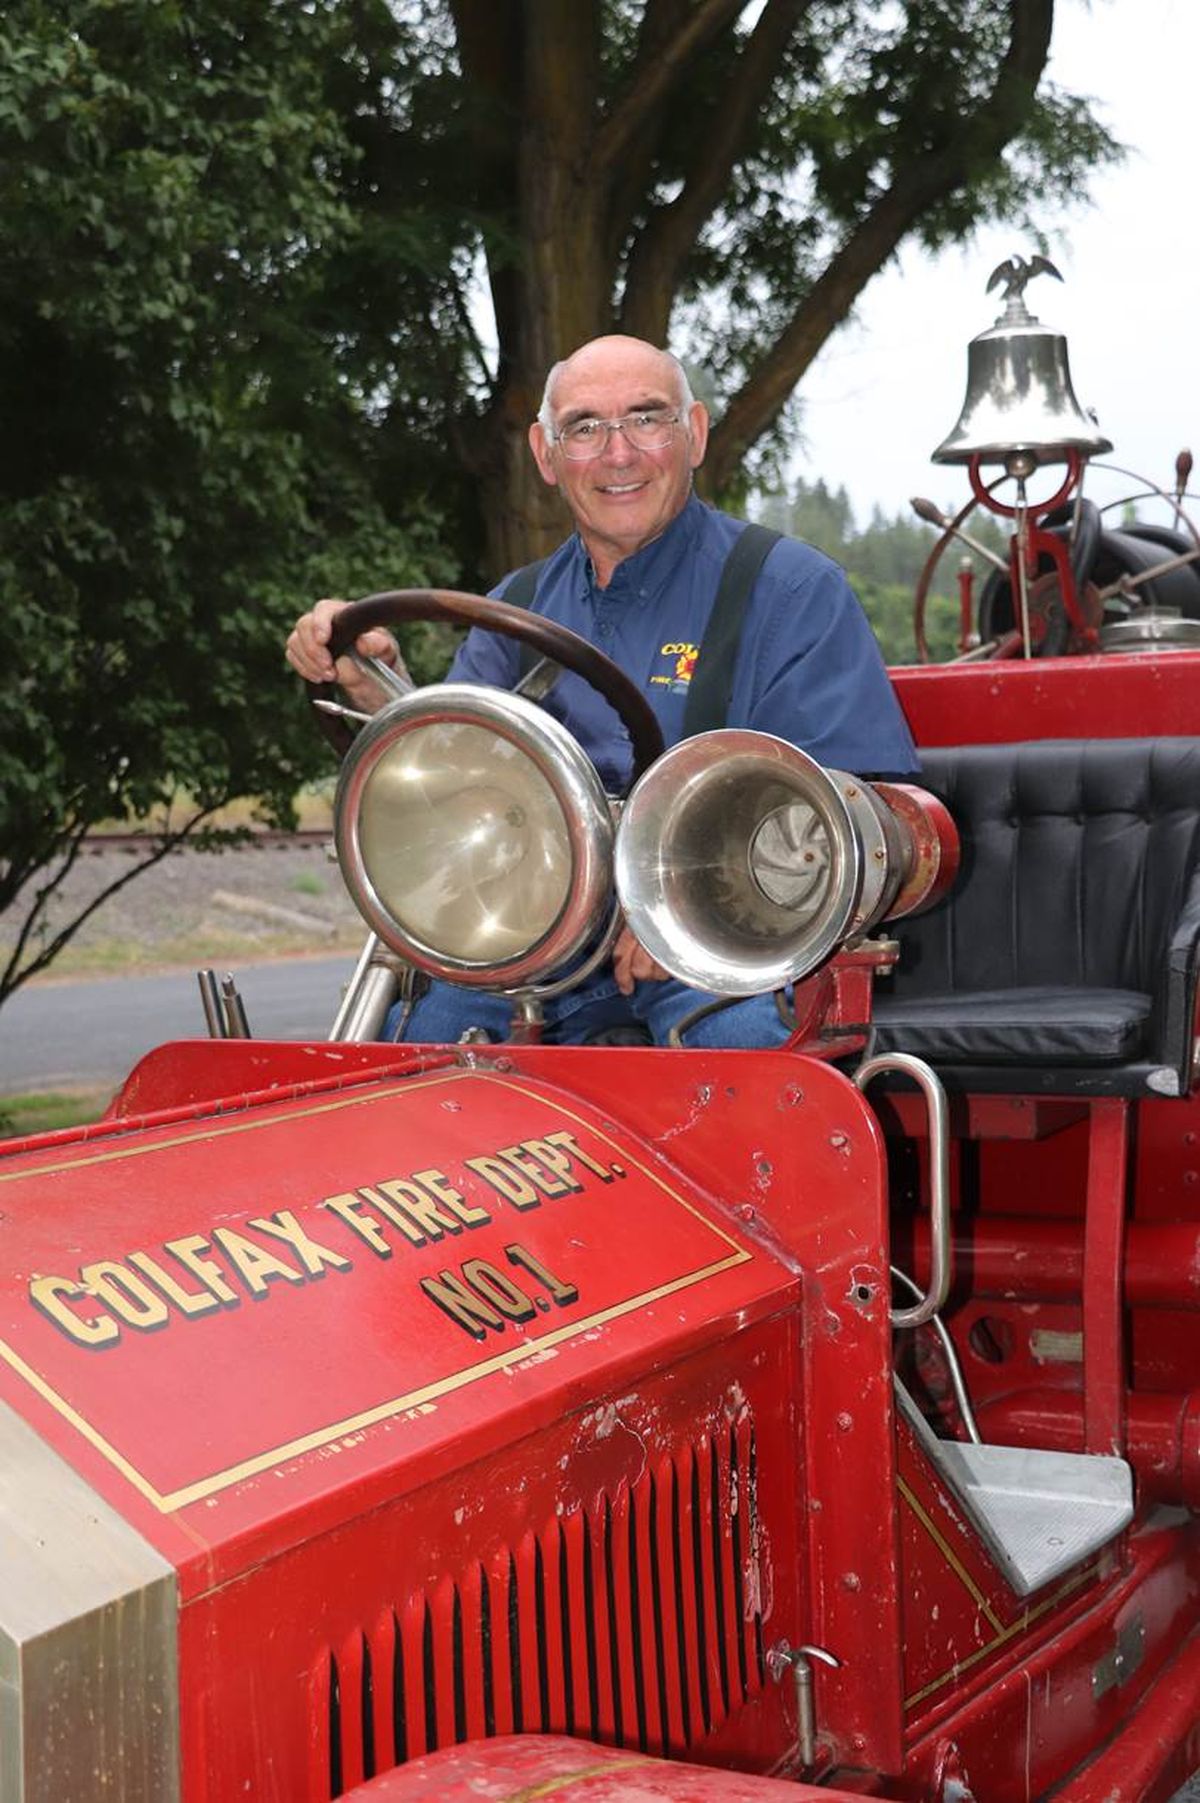 Former Colfax Fire Chief Jim Krouse is seen riding a historic fire truck in this undated photo from the Colfax Fire Department. Krouse, 76, died Saturday while responding to a wildfire.  (Courtesy Colfax Fire Department)